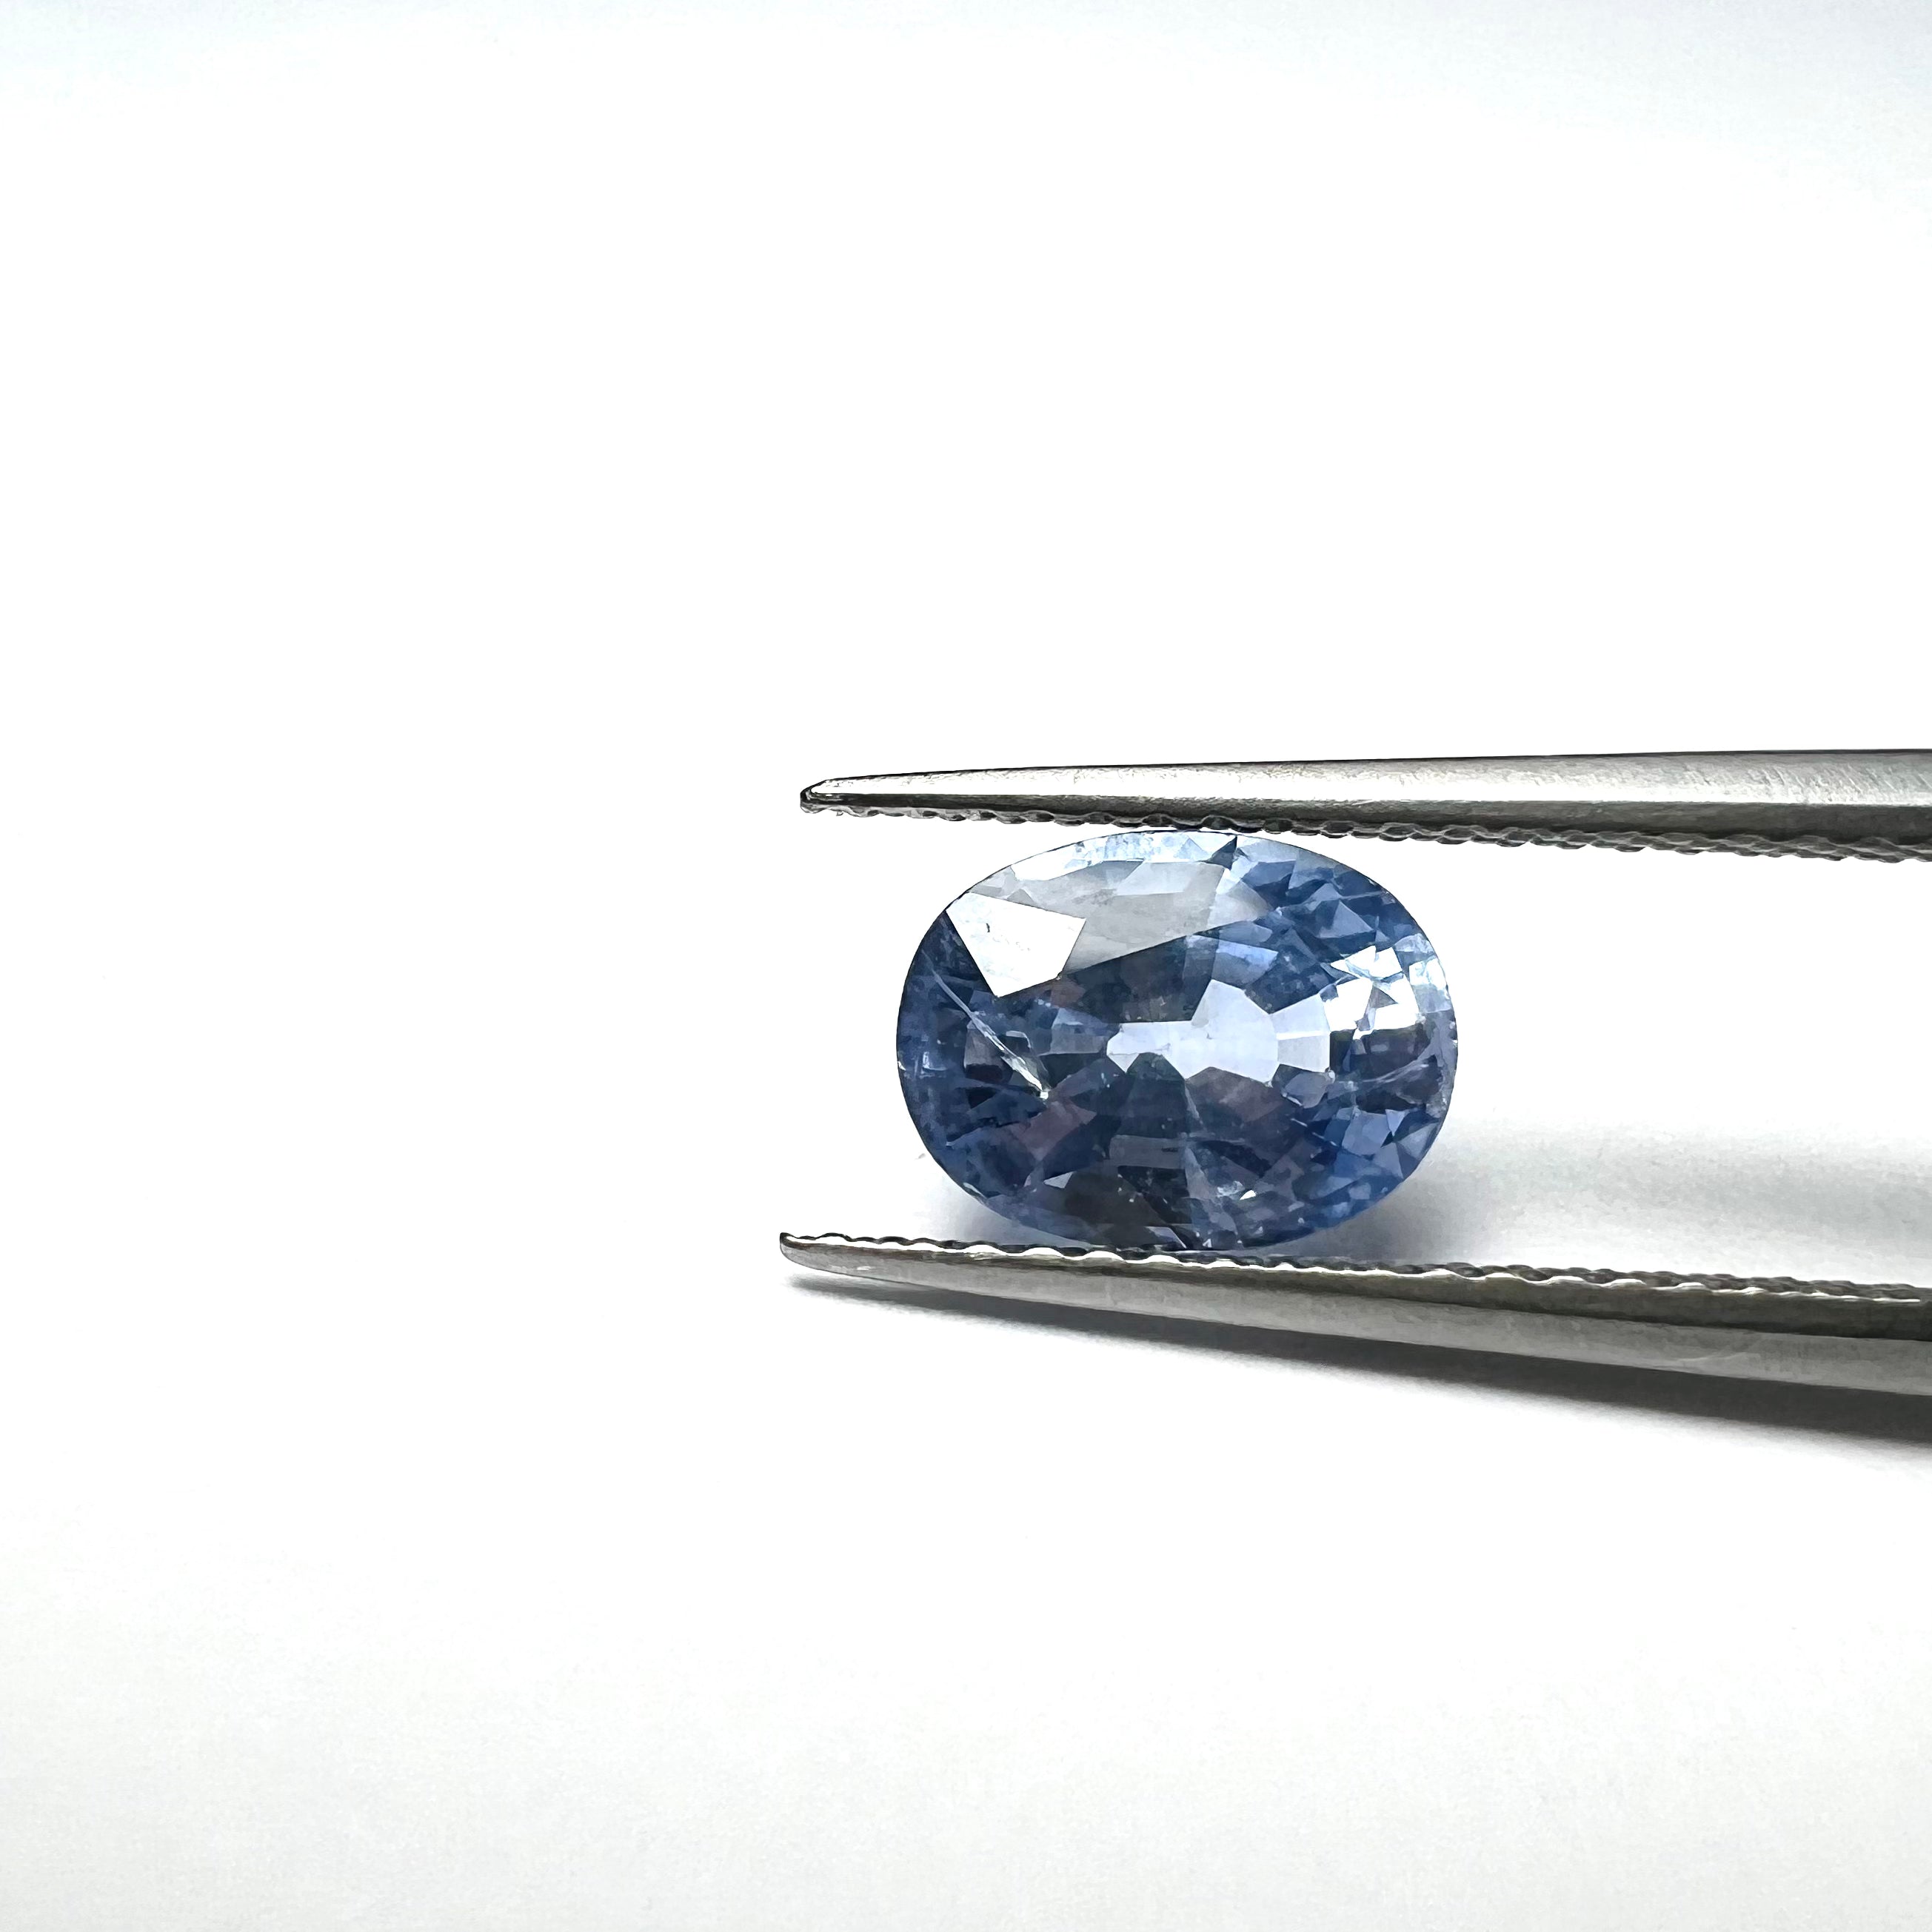 1.89CTW Loose Oval Sapphire 8x6x4.5mm Earth mined Gemstone